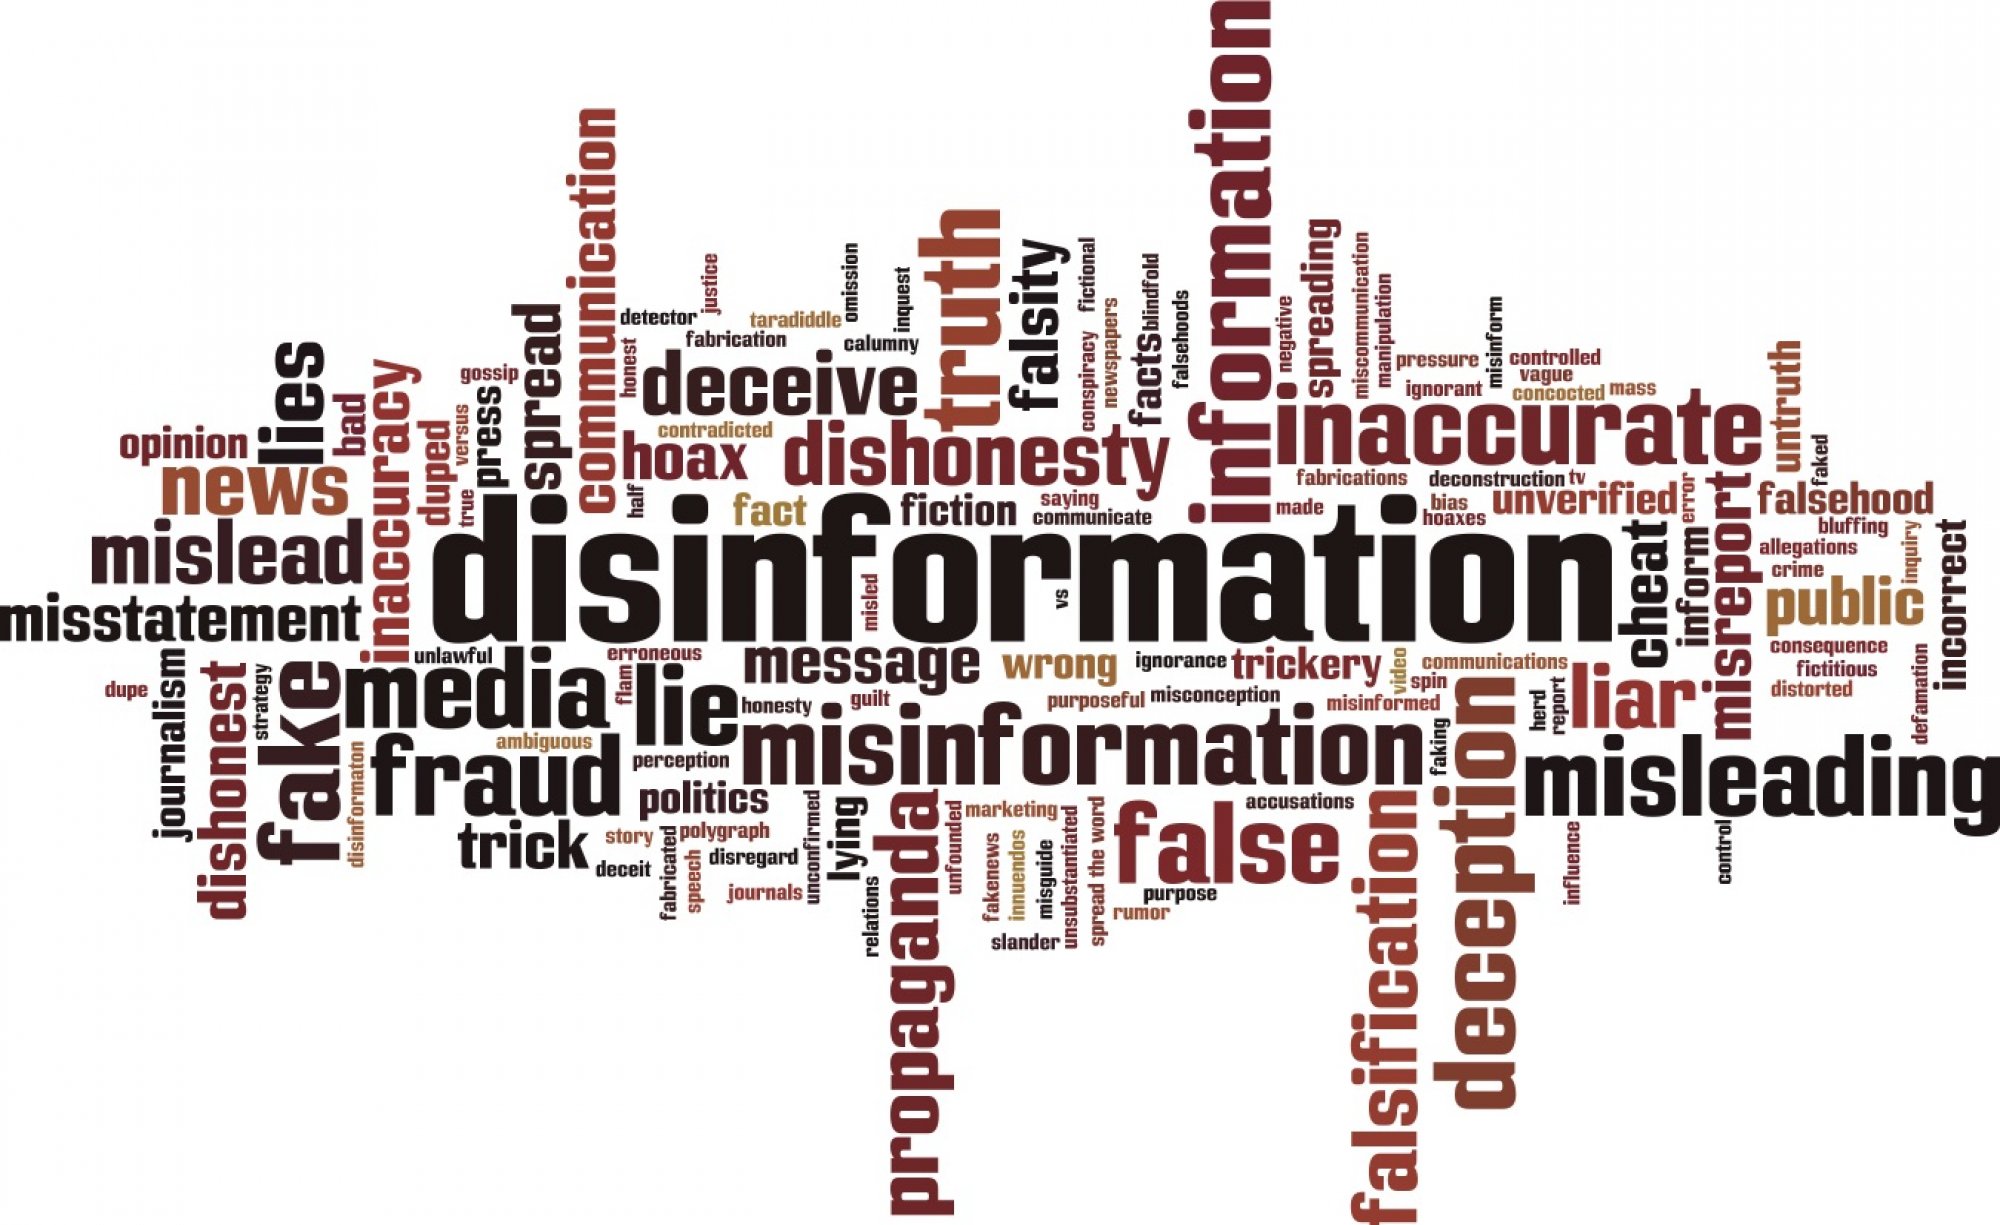 Countering disinformation: The Council of Europe Perspective